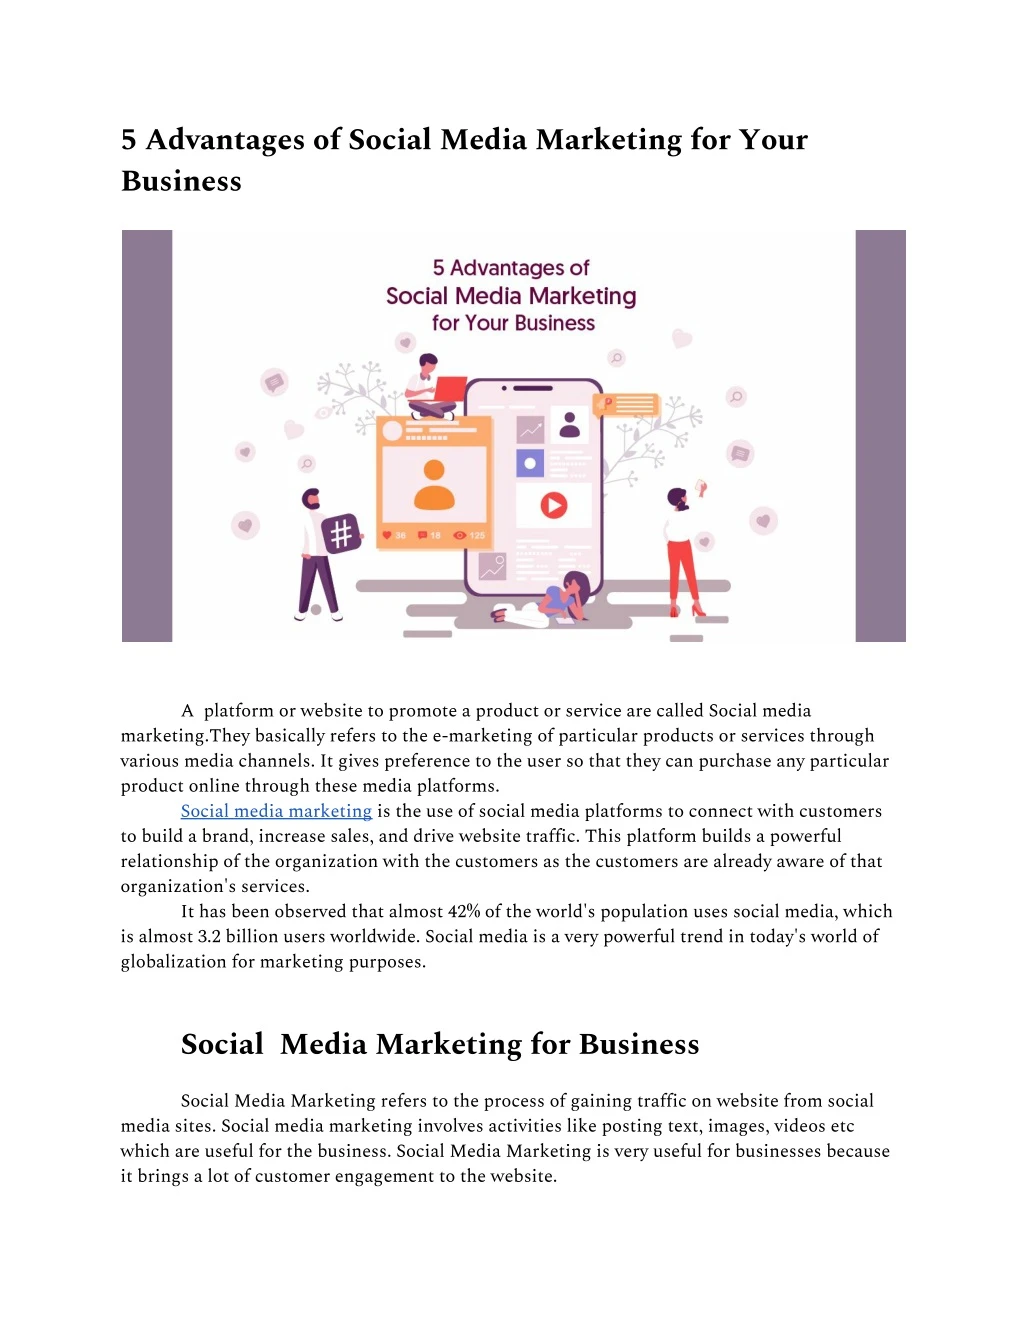 5 advantages of social media marketing for your